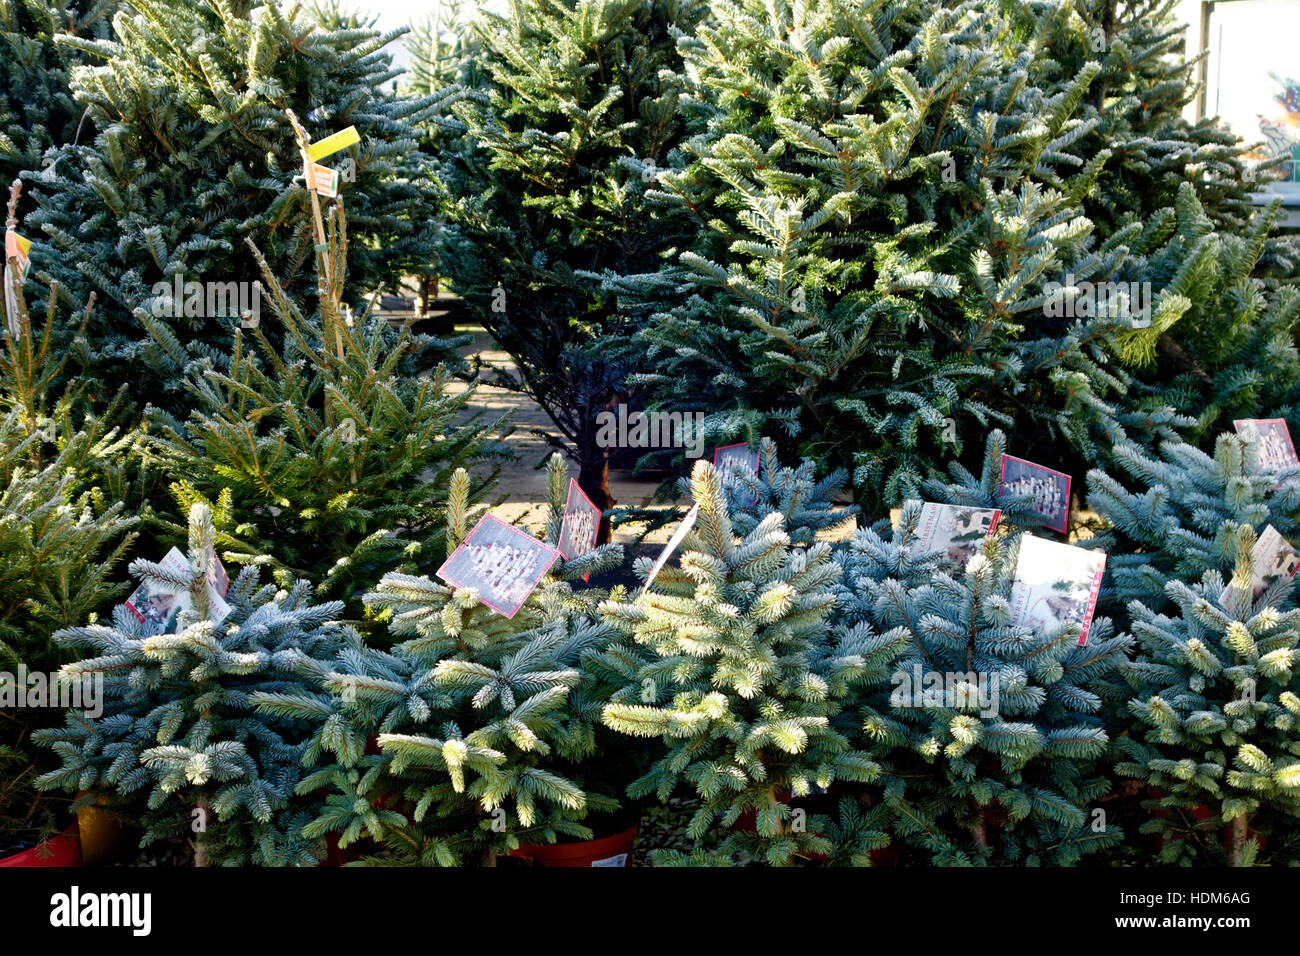 Super Blue Spruce & Norway Spruce Christmas Trees For Sale at Whitehall Garden Centre near Lacock in Wiltshire, United Kingdom. Stock Photo